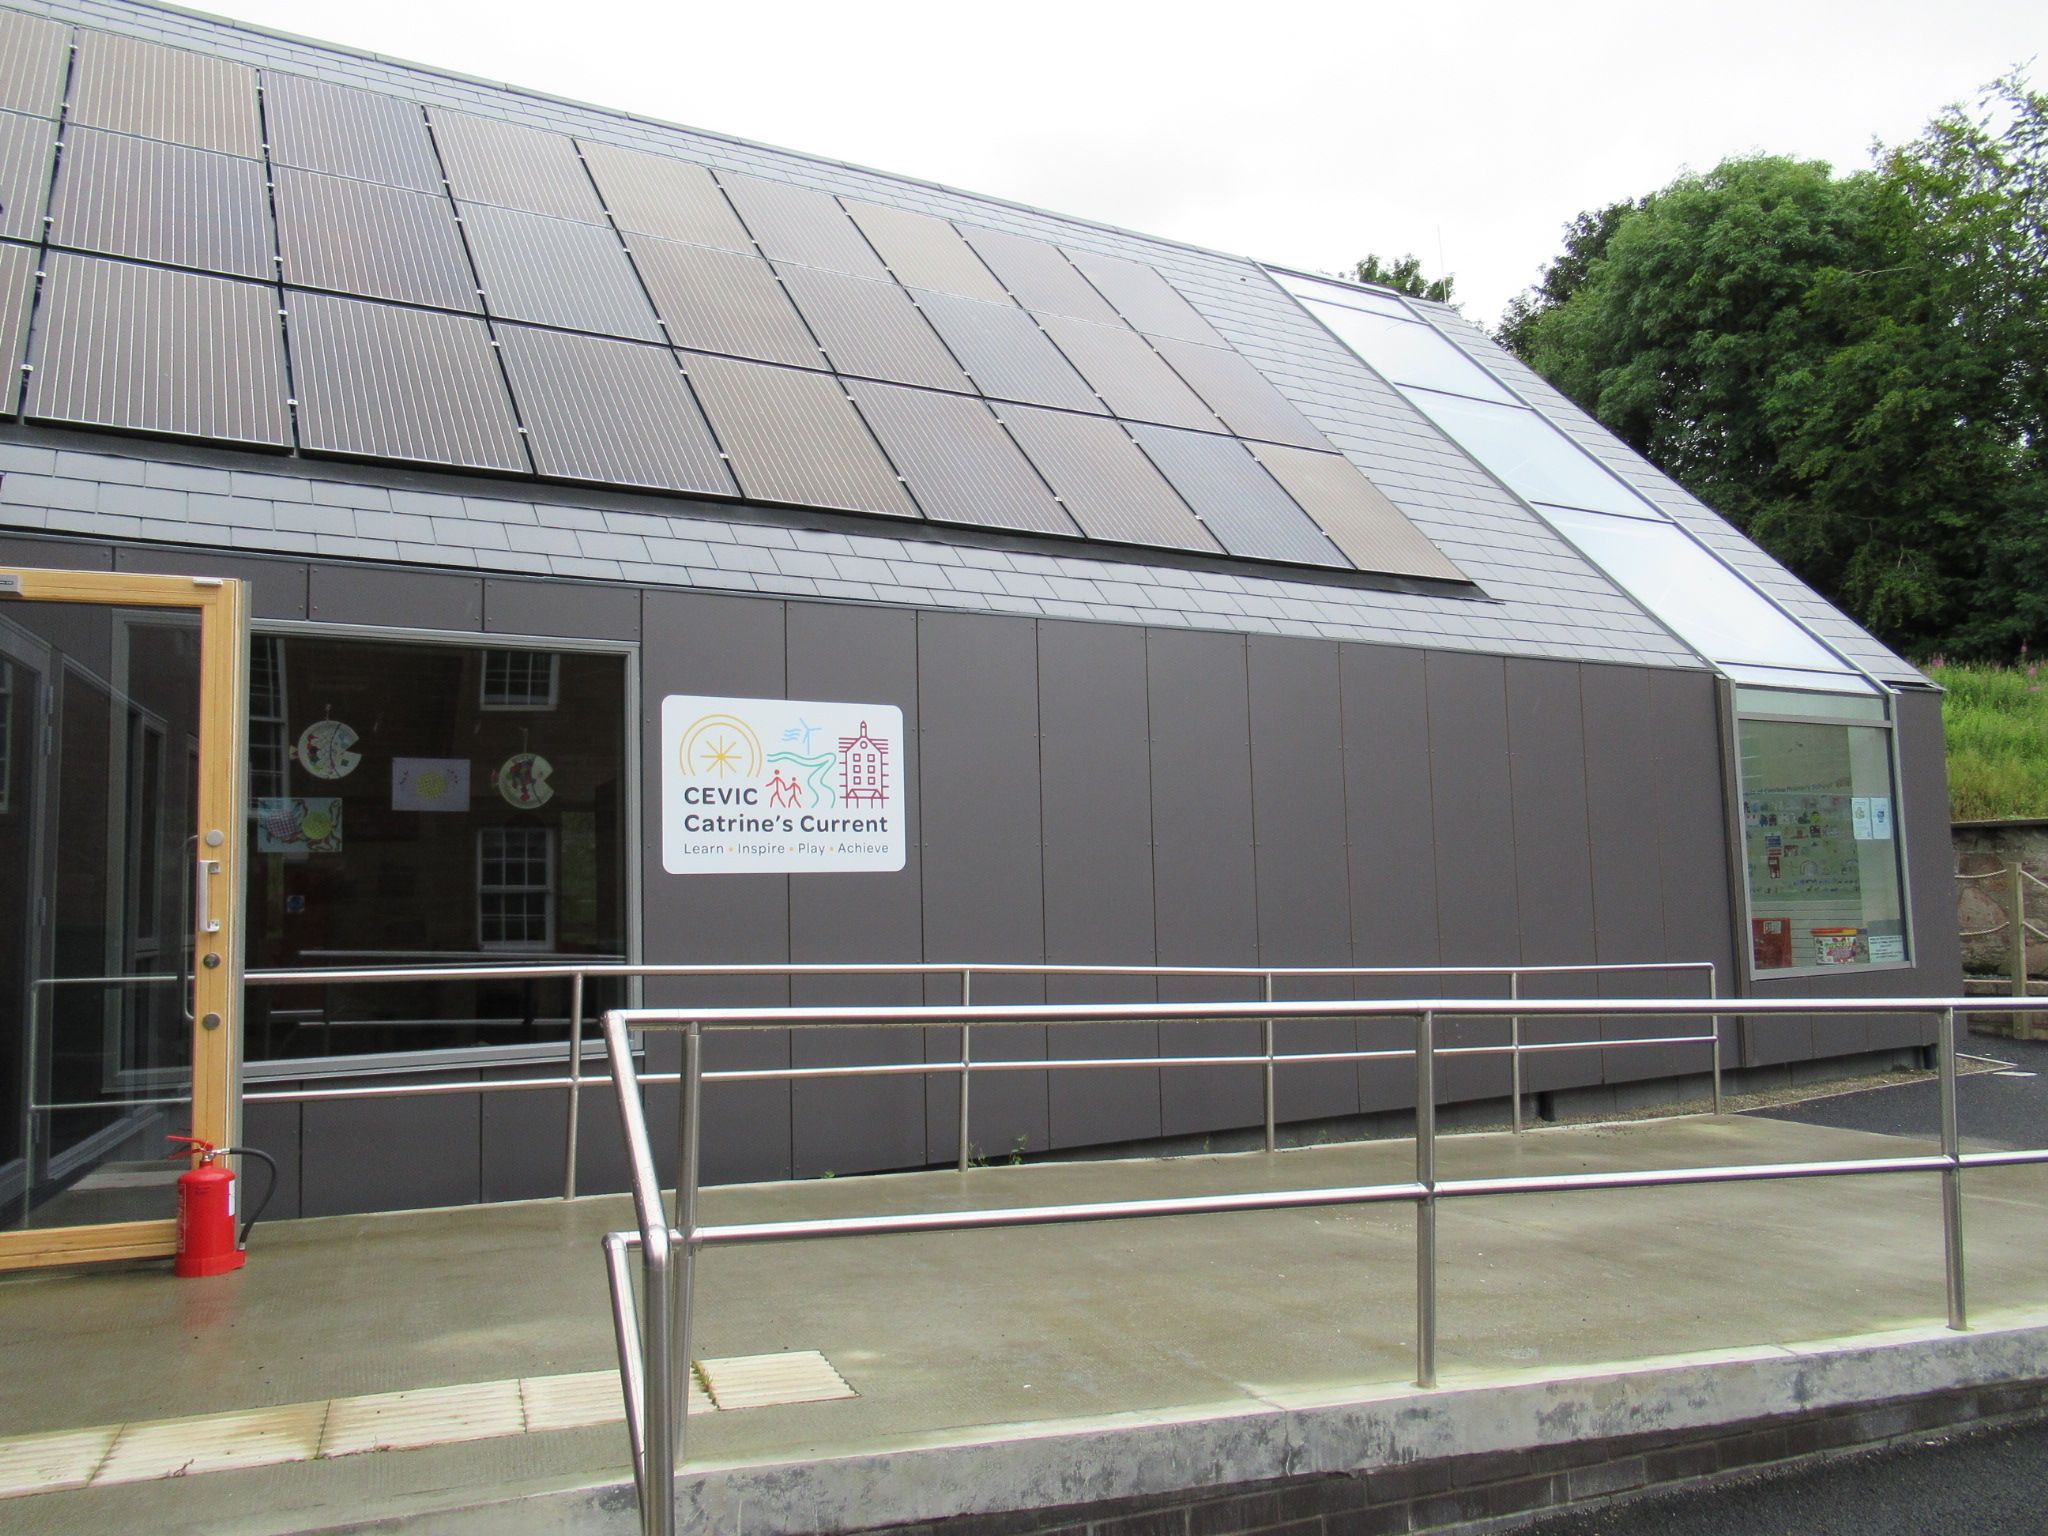 Exterior view of the Community Education and Visitor Interpretation Centre, Catrine, East Ayrshire